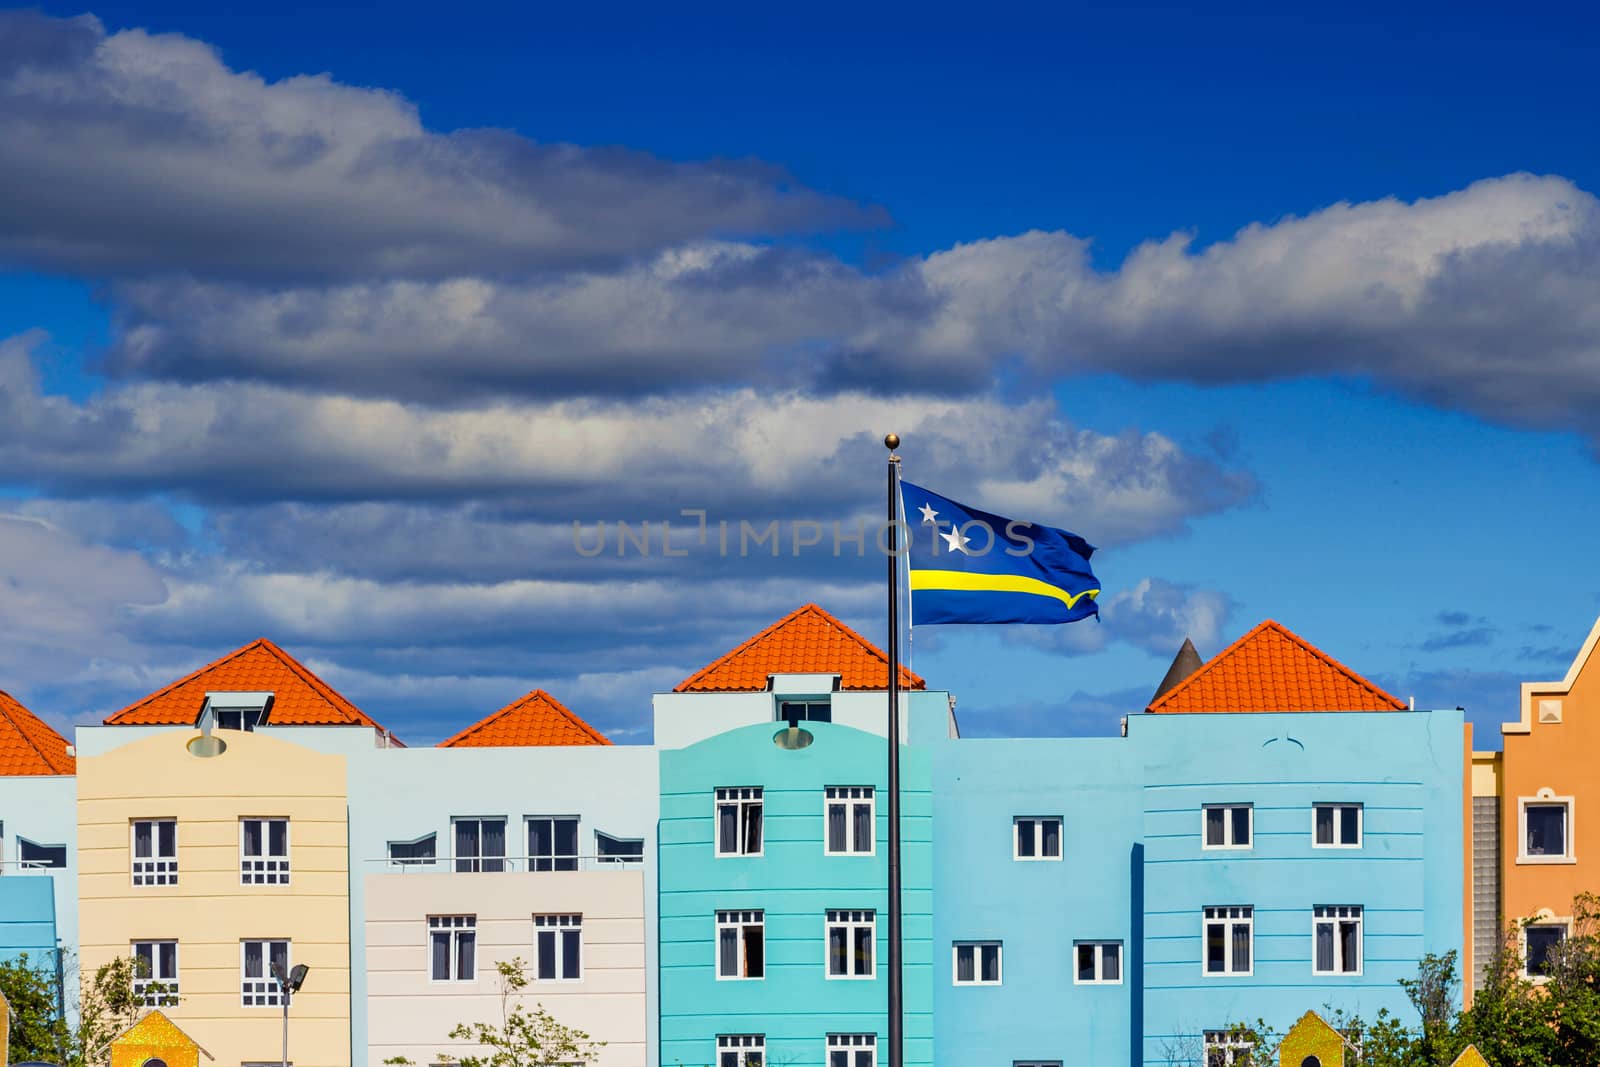 Curacao Flag by colorful buildings under nice skies